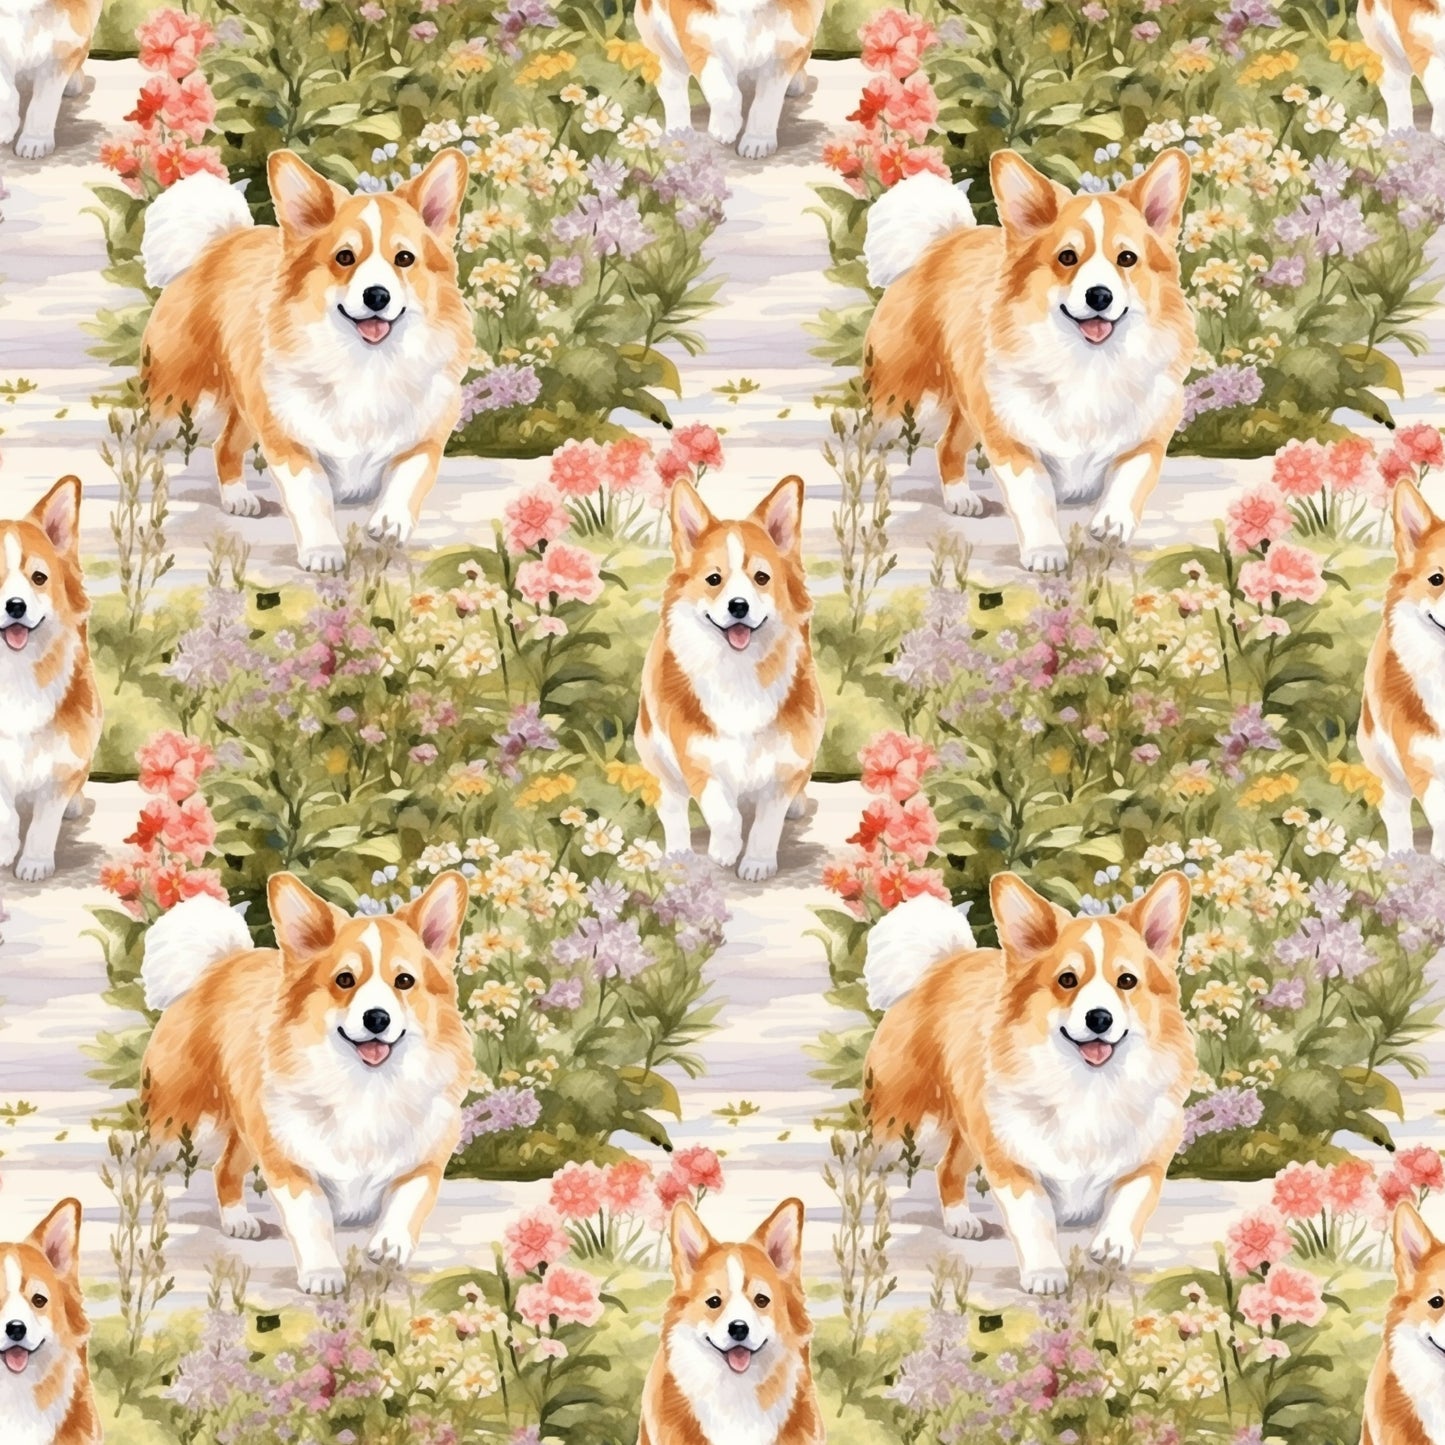 Corgis with Florals (Faux Leather - 8" x 13" Printed Sheet)